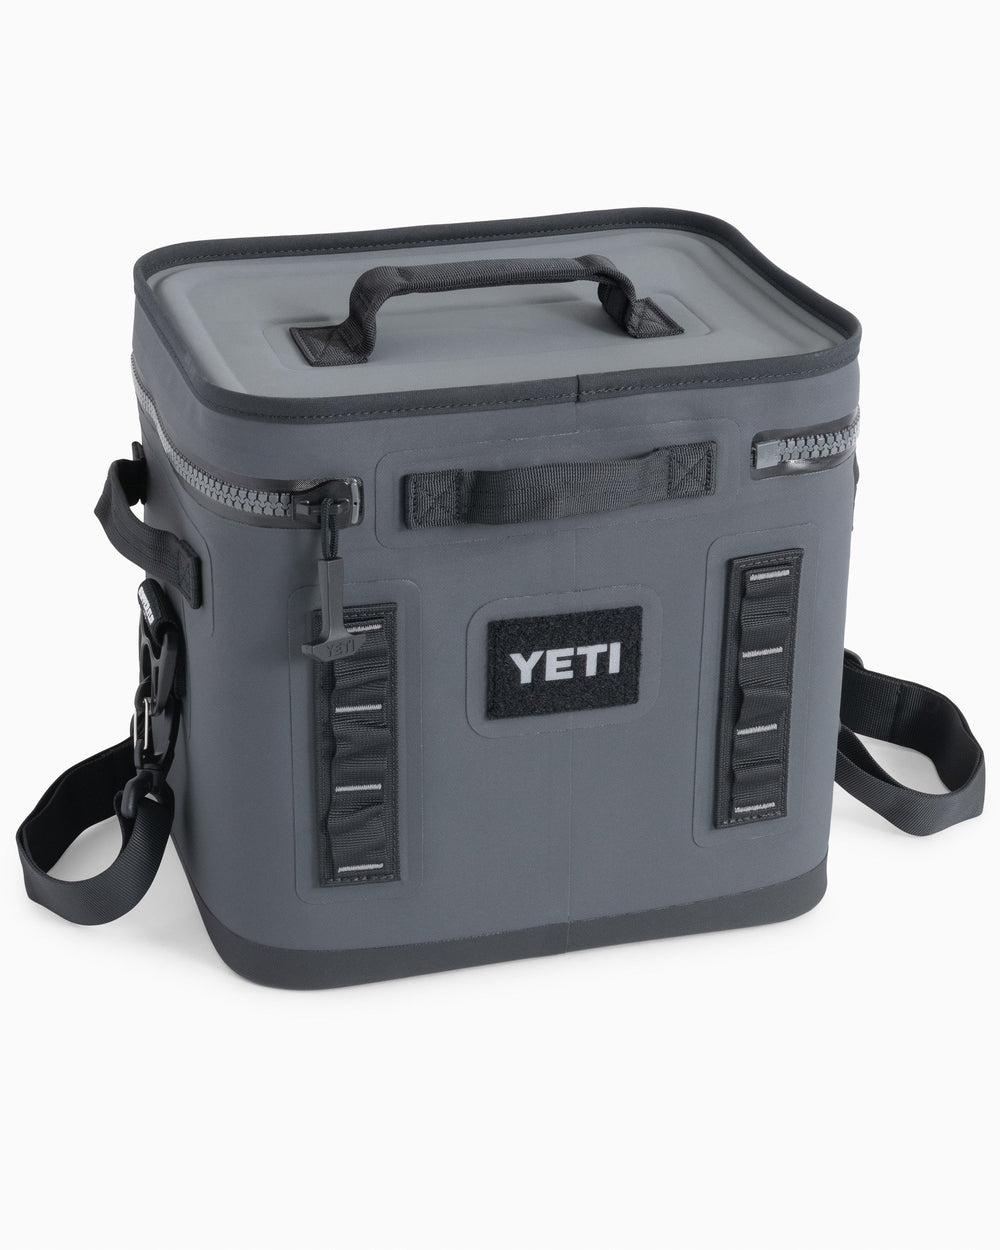 The back view of the Yeti Hopper Flip 12 by Southern Tide - Charcoal